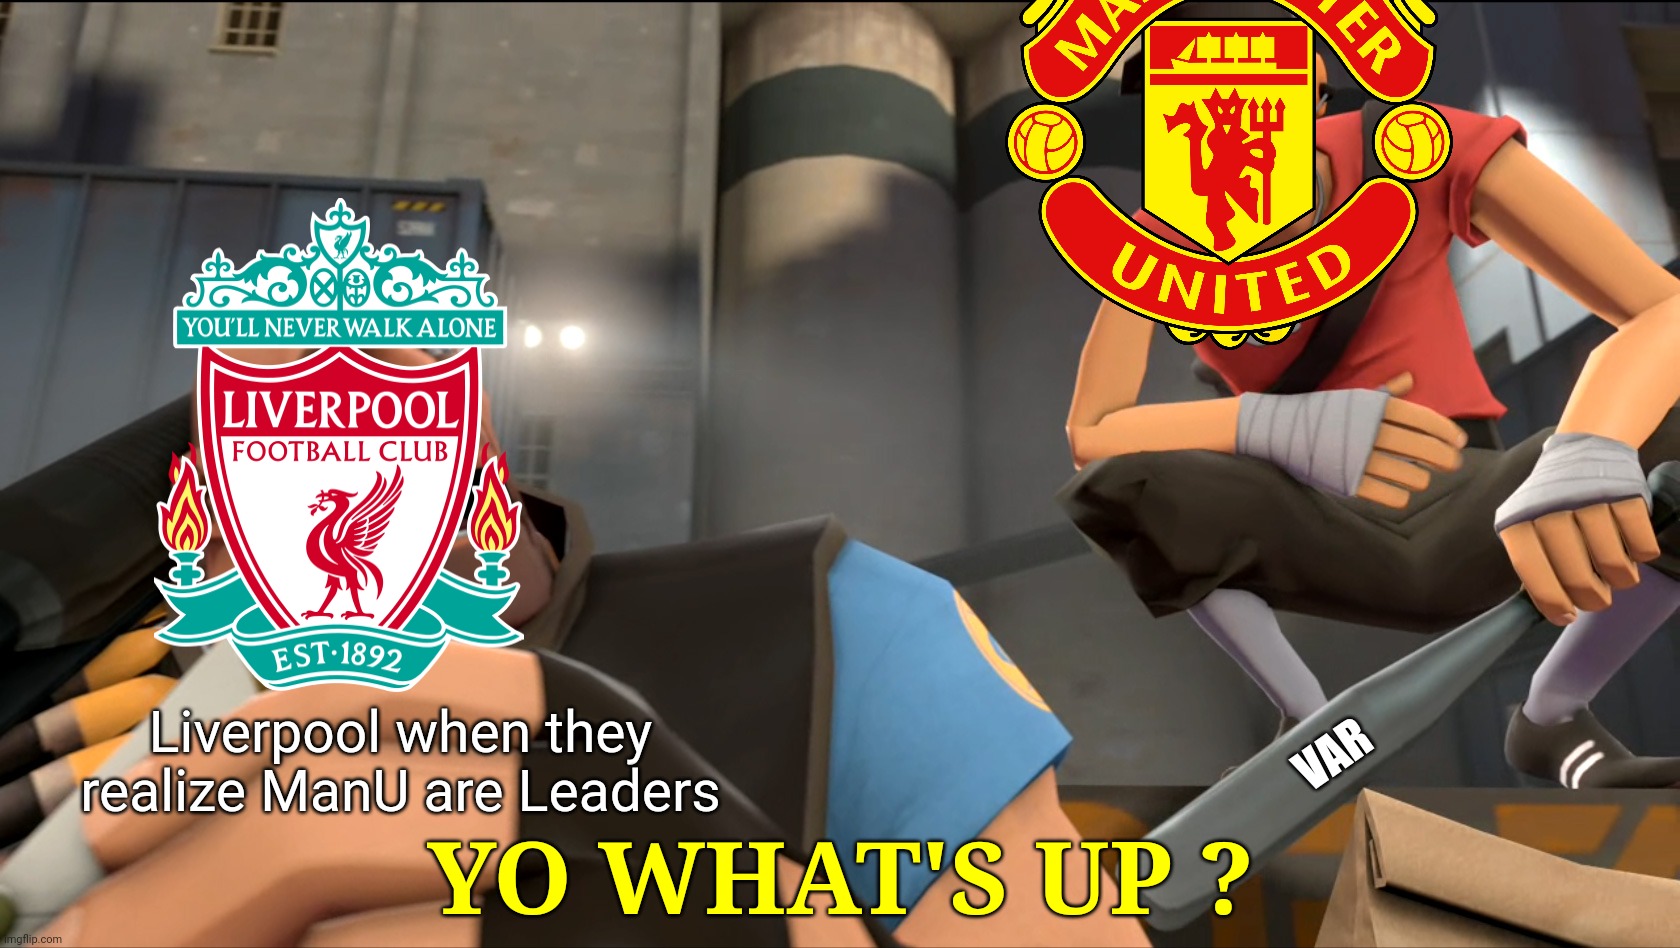 The Reds vs The Red Devils. Who would win sunday? | VAR; Liverpool when they realize ManU are Leaders; YO WHAT'S UP ? | image tagged in yo what's up,liverpool,manchester united | made w/ Imgflip meme maker